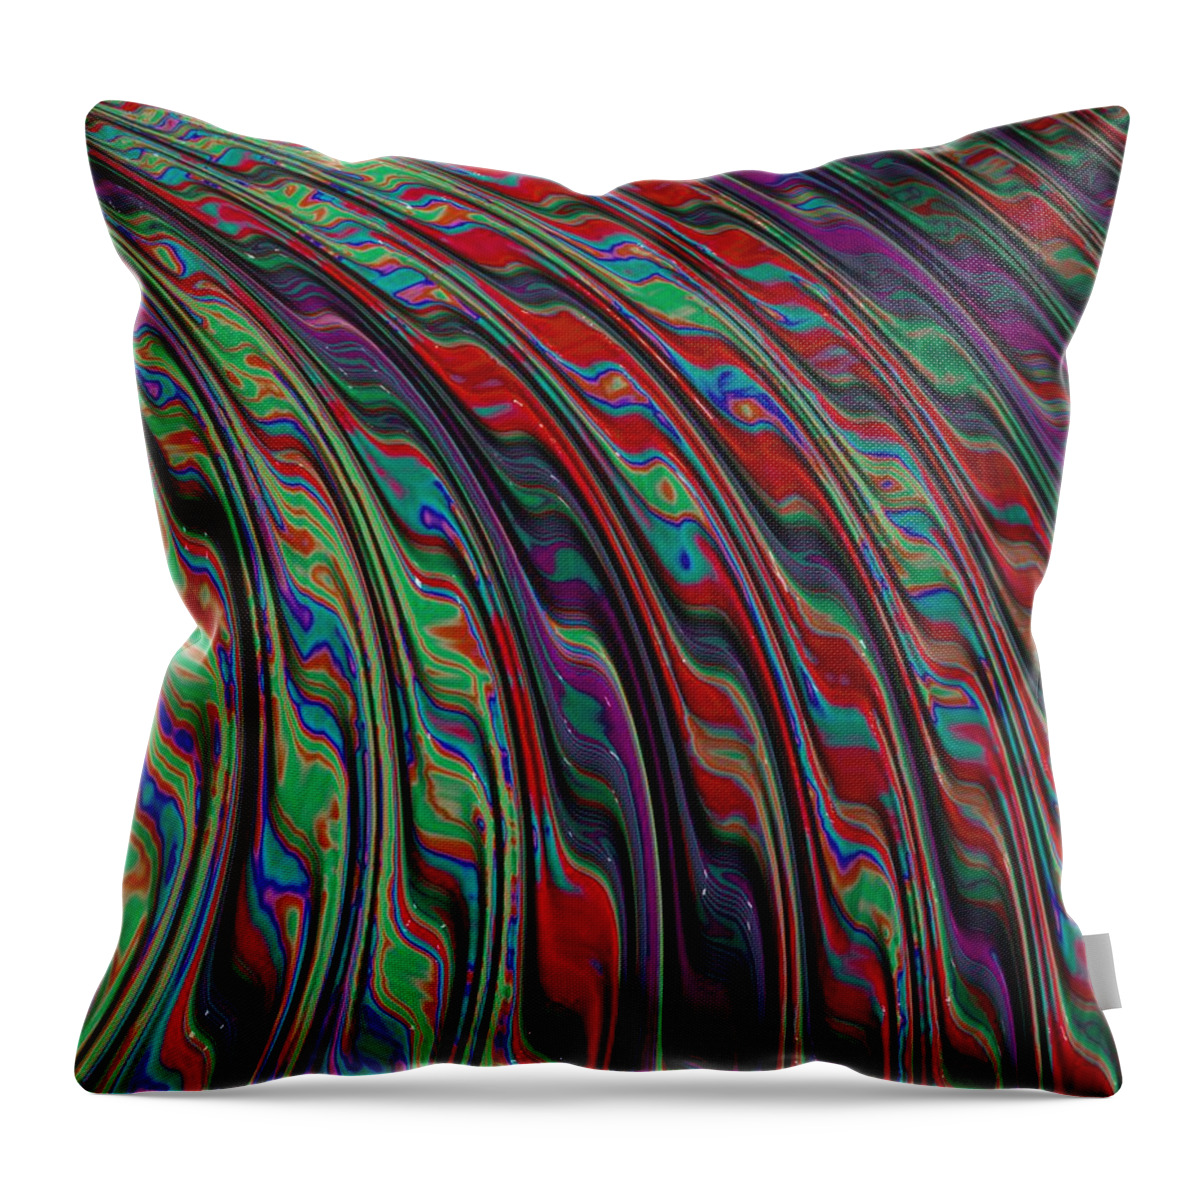 Marbled Throw Pillow featuring the digital art Color Curves by Bonnie Bruno